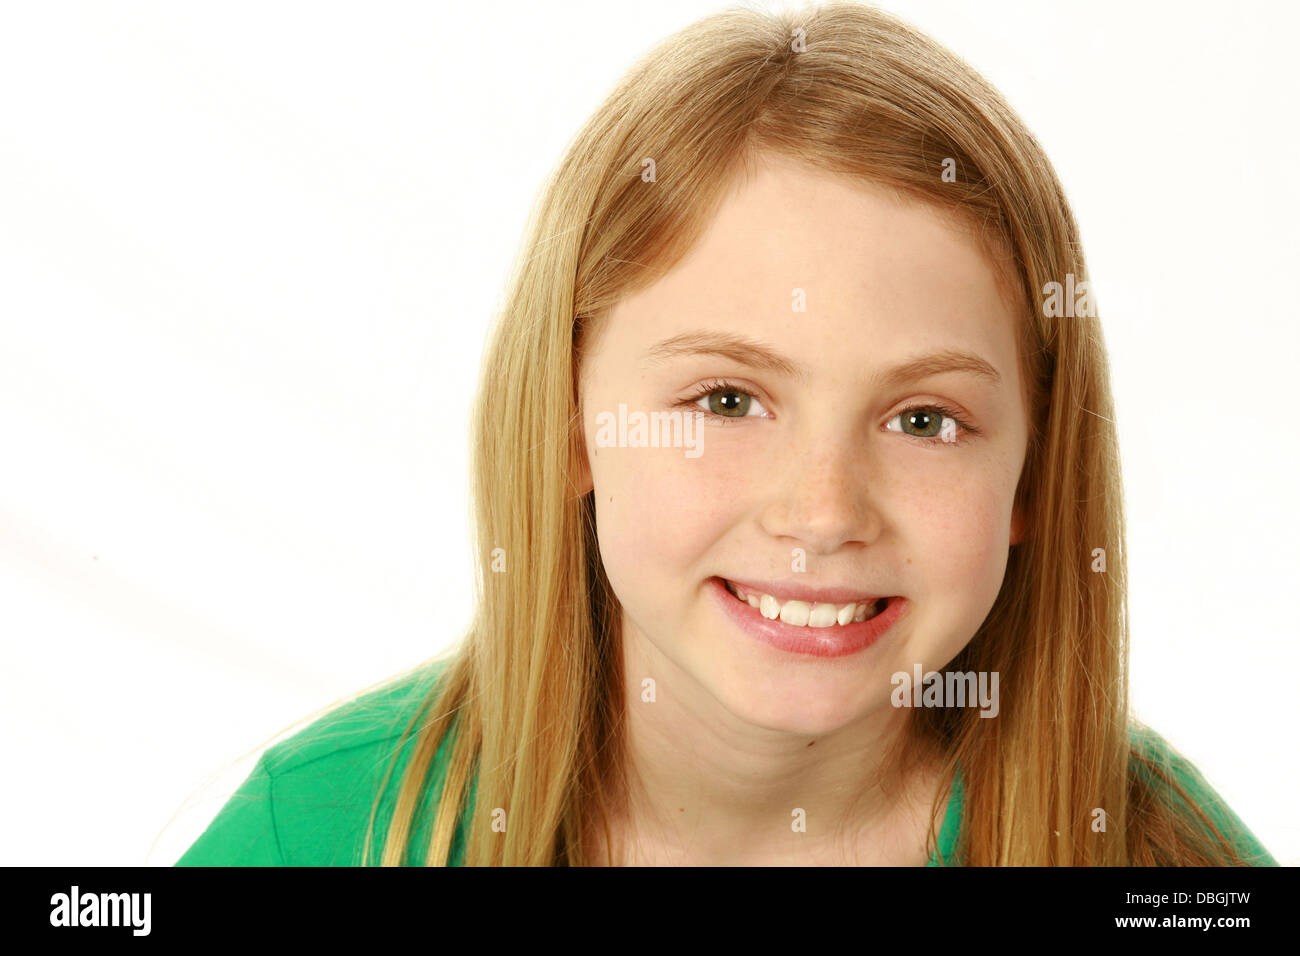 Portrait of smiling preteen girl isolated on white Banque D'Images